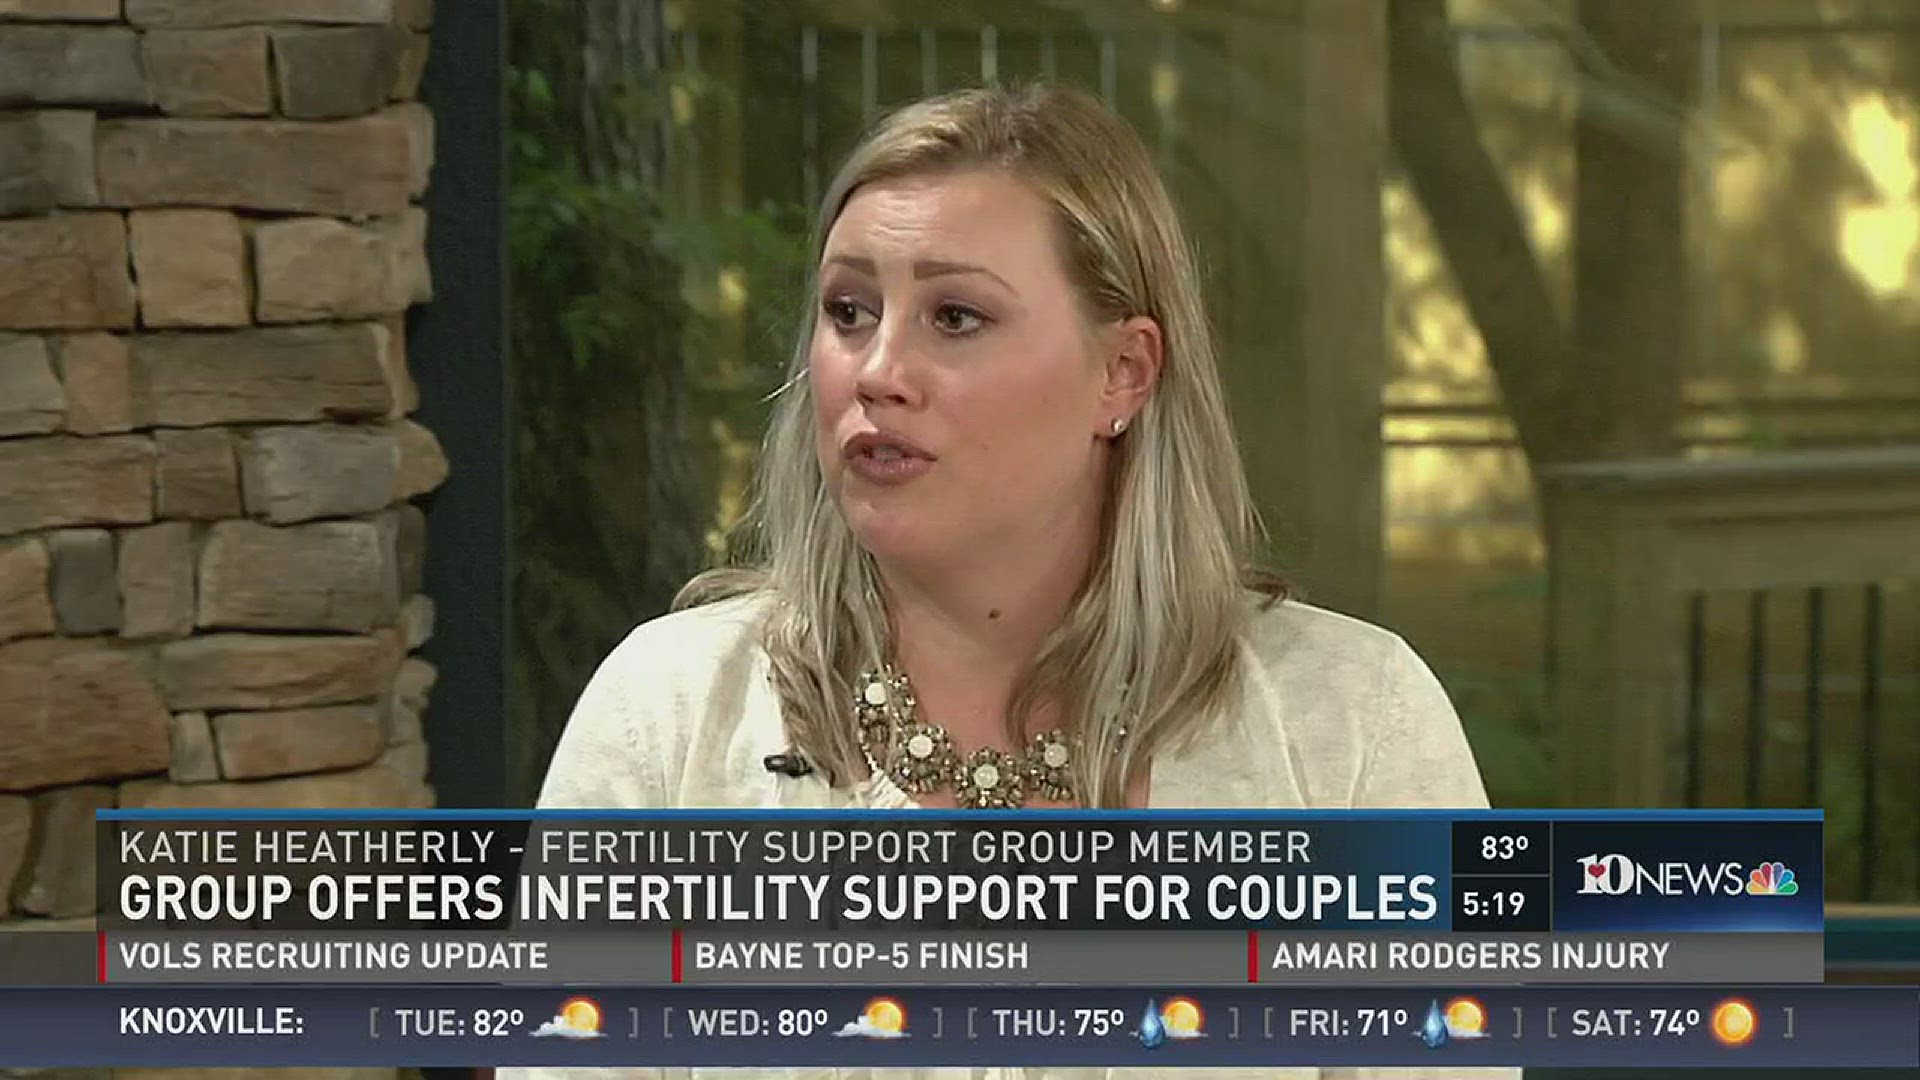 Next Monday marks the start of National Infertility Awareness Week. Katie Heatherly talks about the lengths some couples must go to to get pregnant.